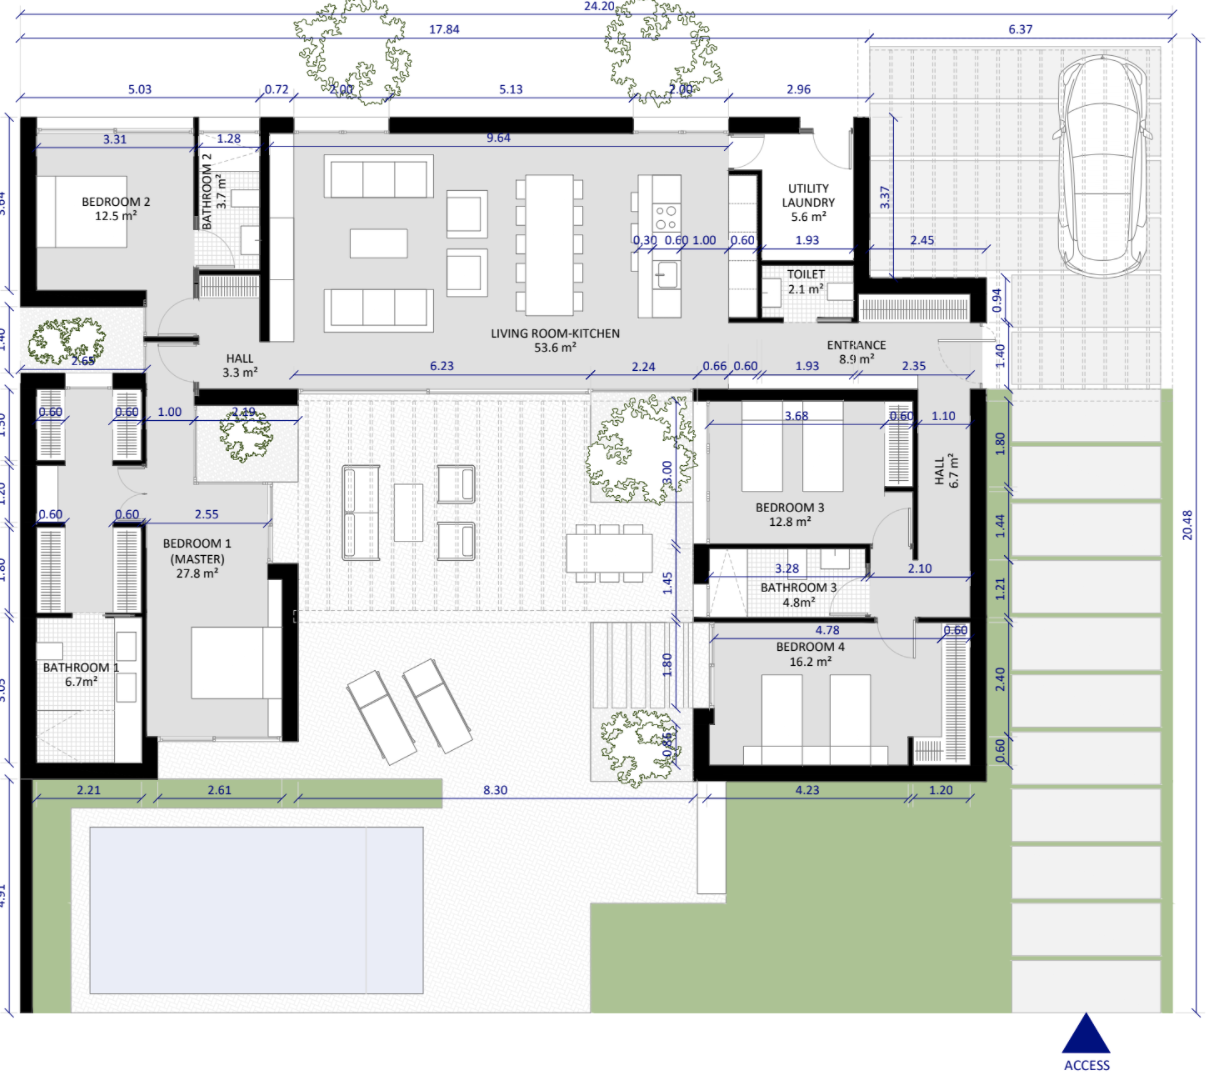 Floor plan for Villa ref 3636 for sale in Altaona Golf And Country Village Spain - Quality Homes Costa Cálida